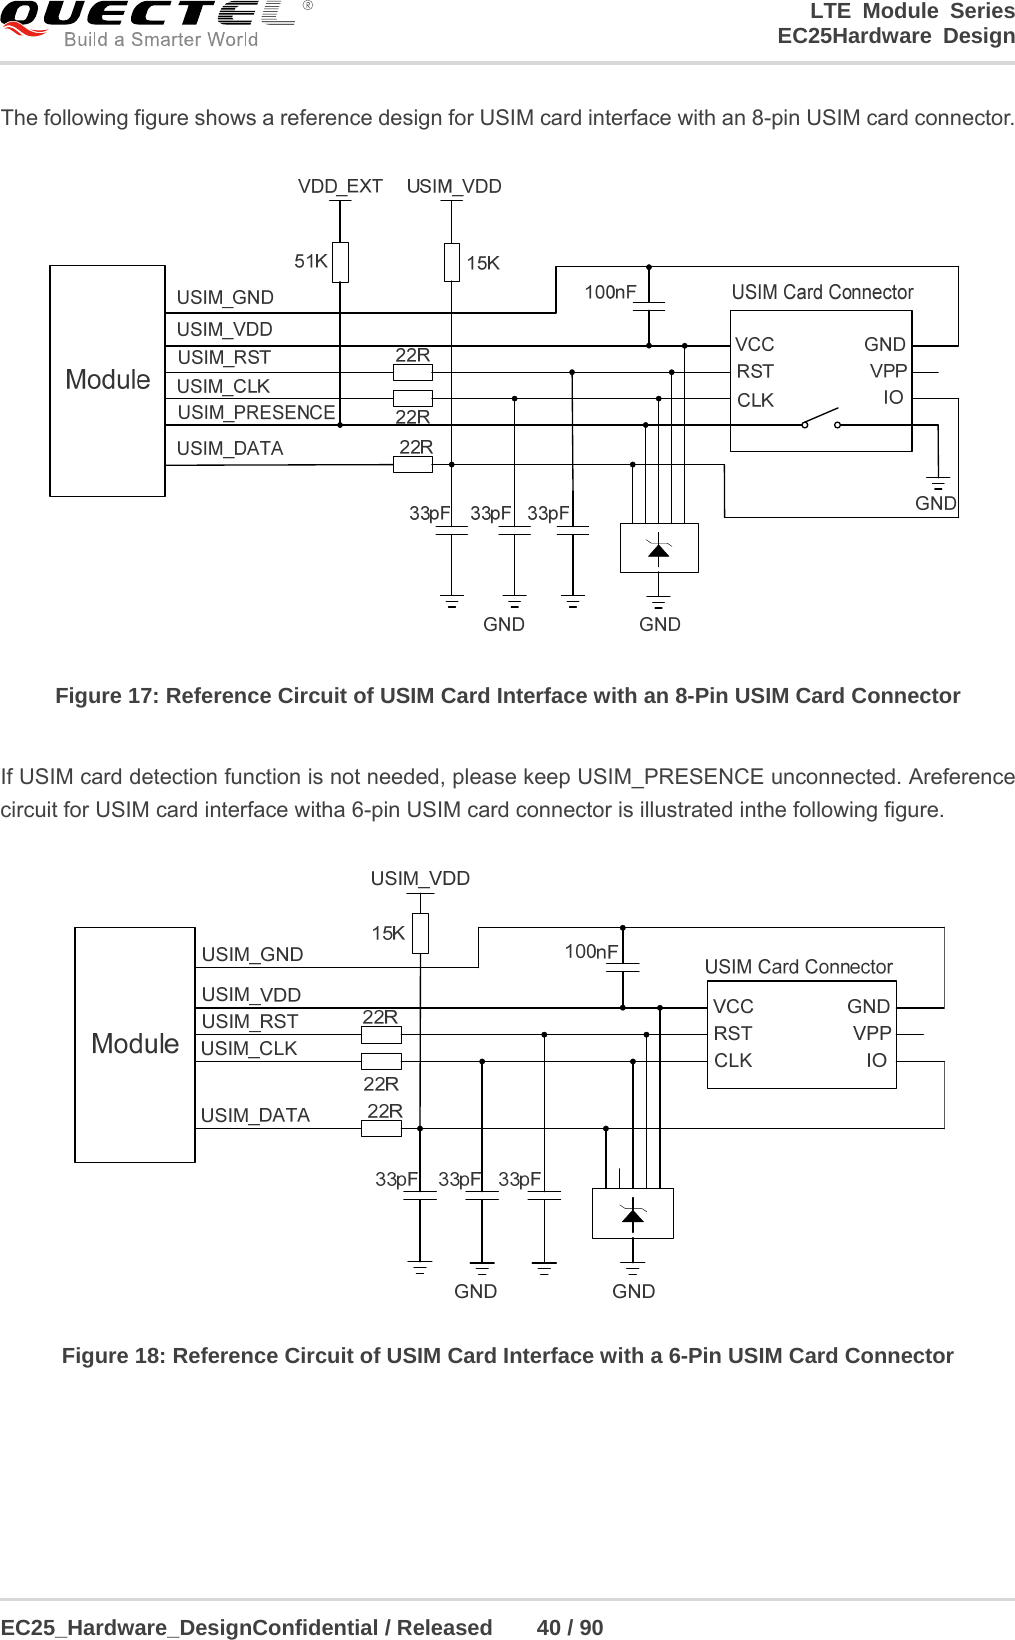 LTE Module Series                                                  EC25Hardware Design  EC25_Hardware_DesignConfidential / Released    40 / 90    The following figure shows a reference design for USIM card interface with an 8-pin USIM card connector.  Figure 17: Reference Circuit of USIM Card Interface with an 8-Pin USIM Card Connector  If USIM card detection function is not needed, please keep USIM_PRESENCE unconnected. Areference circuit for USIM card interface witha 6-pin USIM card connector is illustrated inthe following figure.  Figure 18: Reference Circuit of USIM Card Interface with a 6-Pin USIM Card Connector      